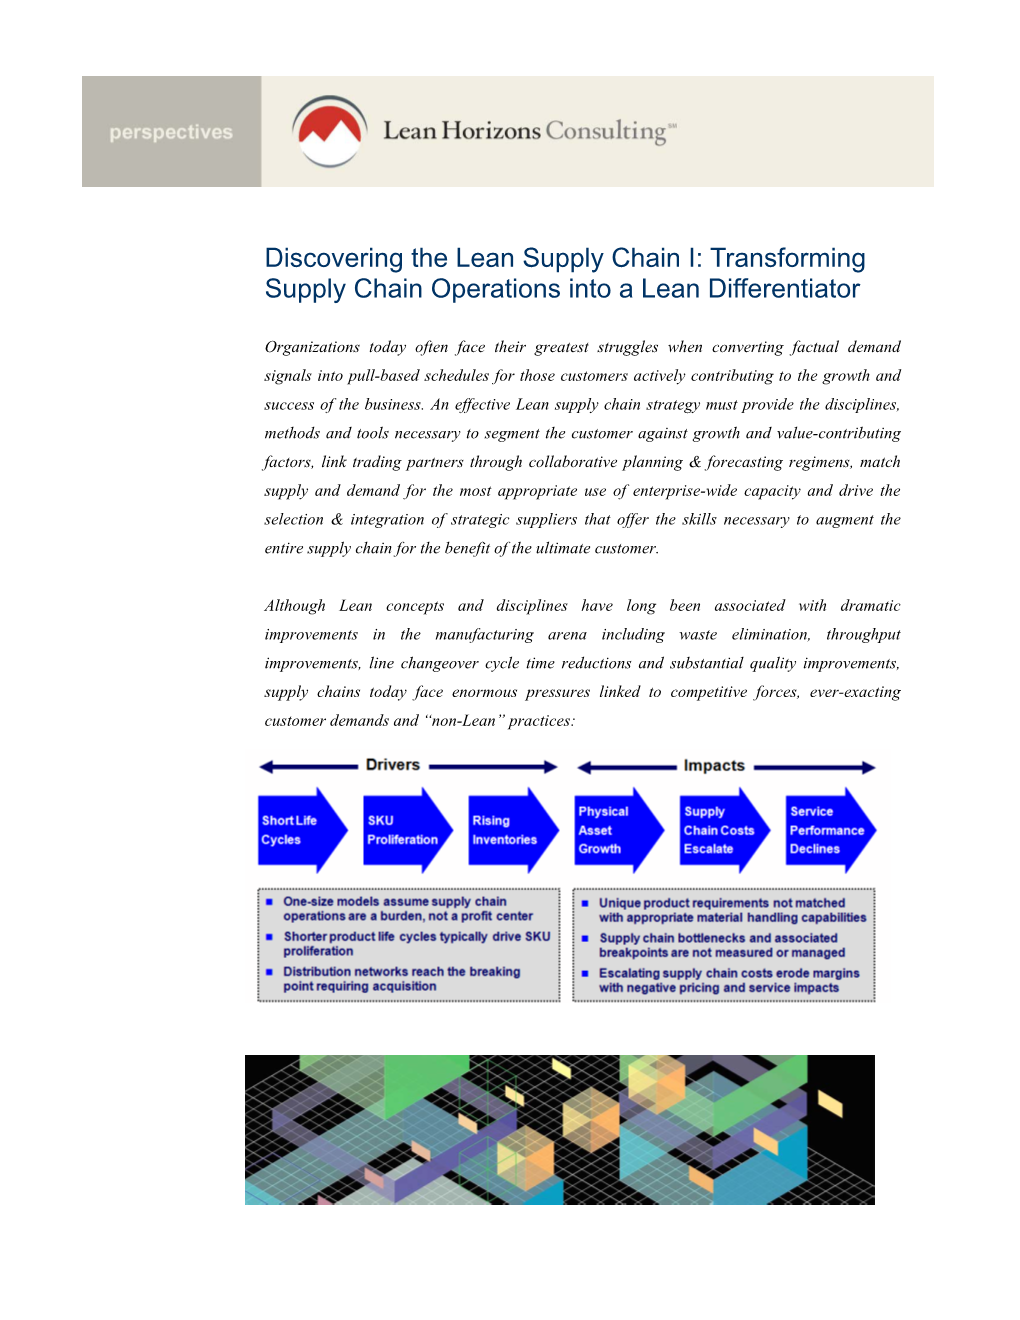 Discovering the Lean Supply Chain I: Transforming Supply Chain Operations Into a Lean Differentiator